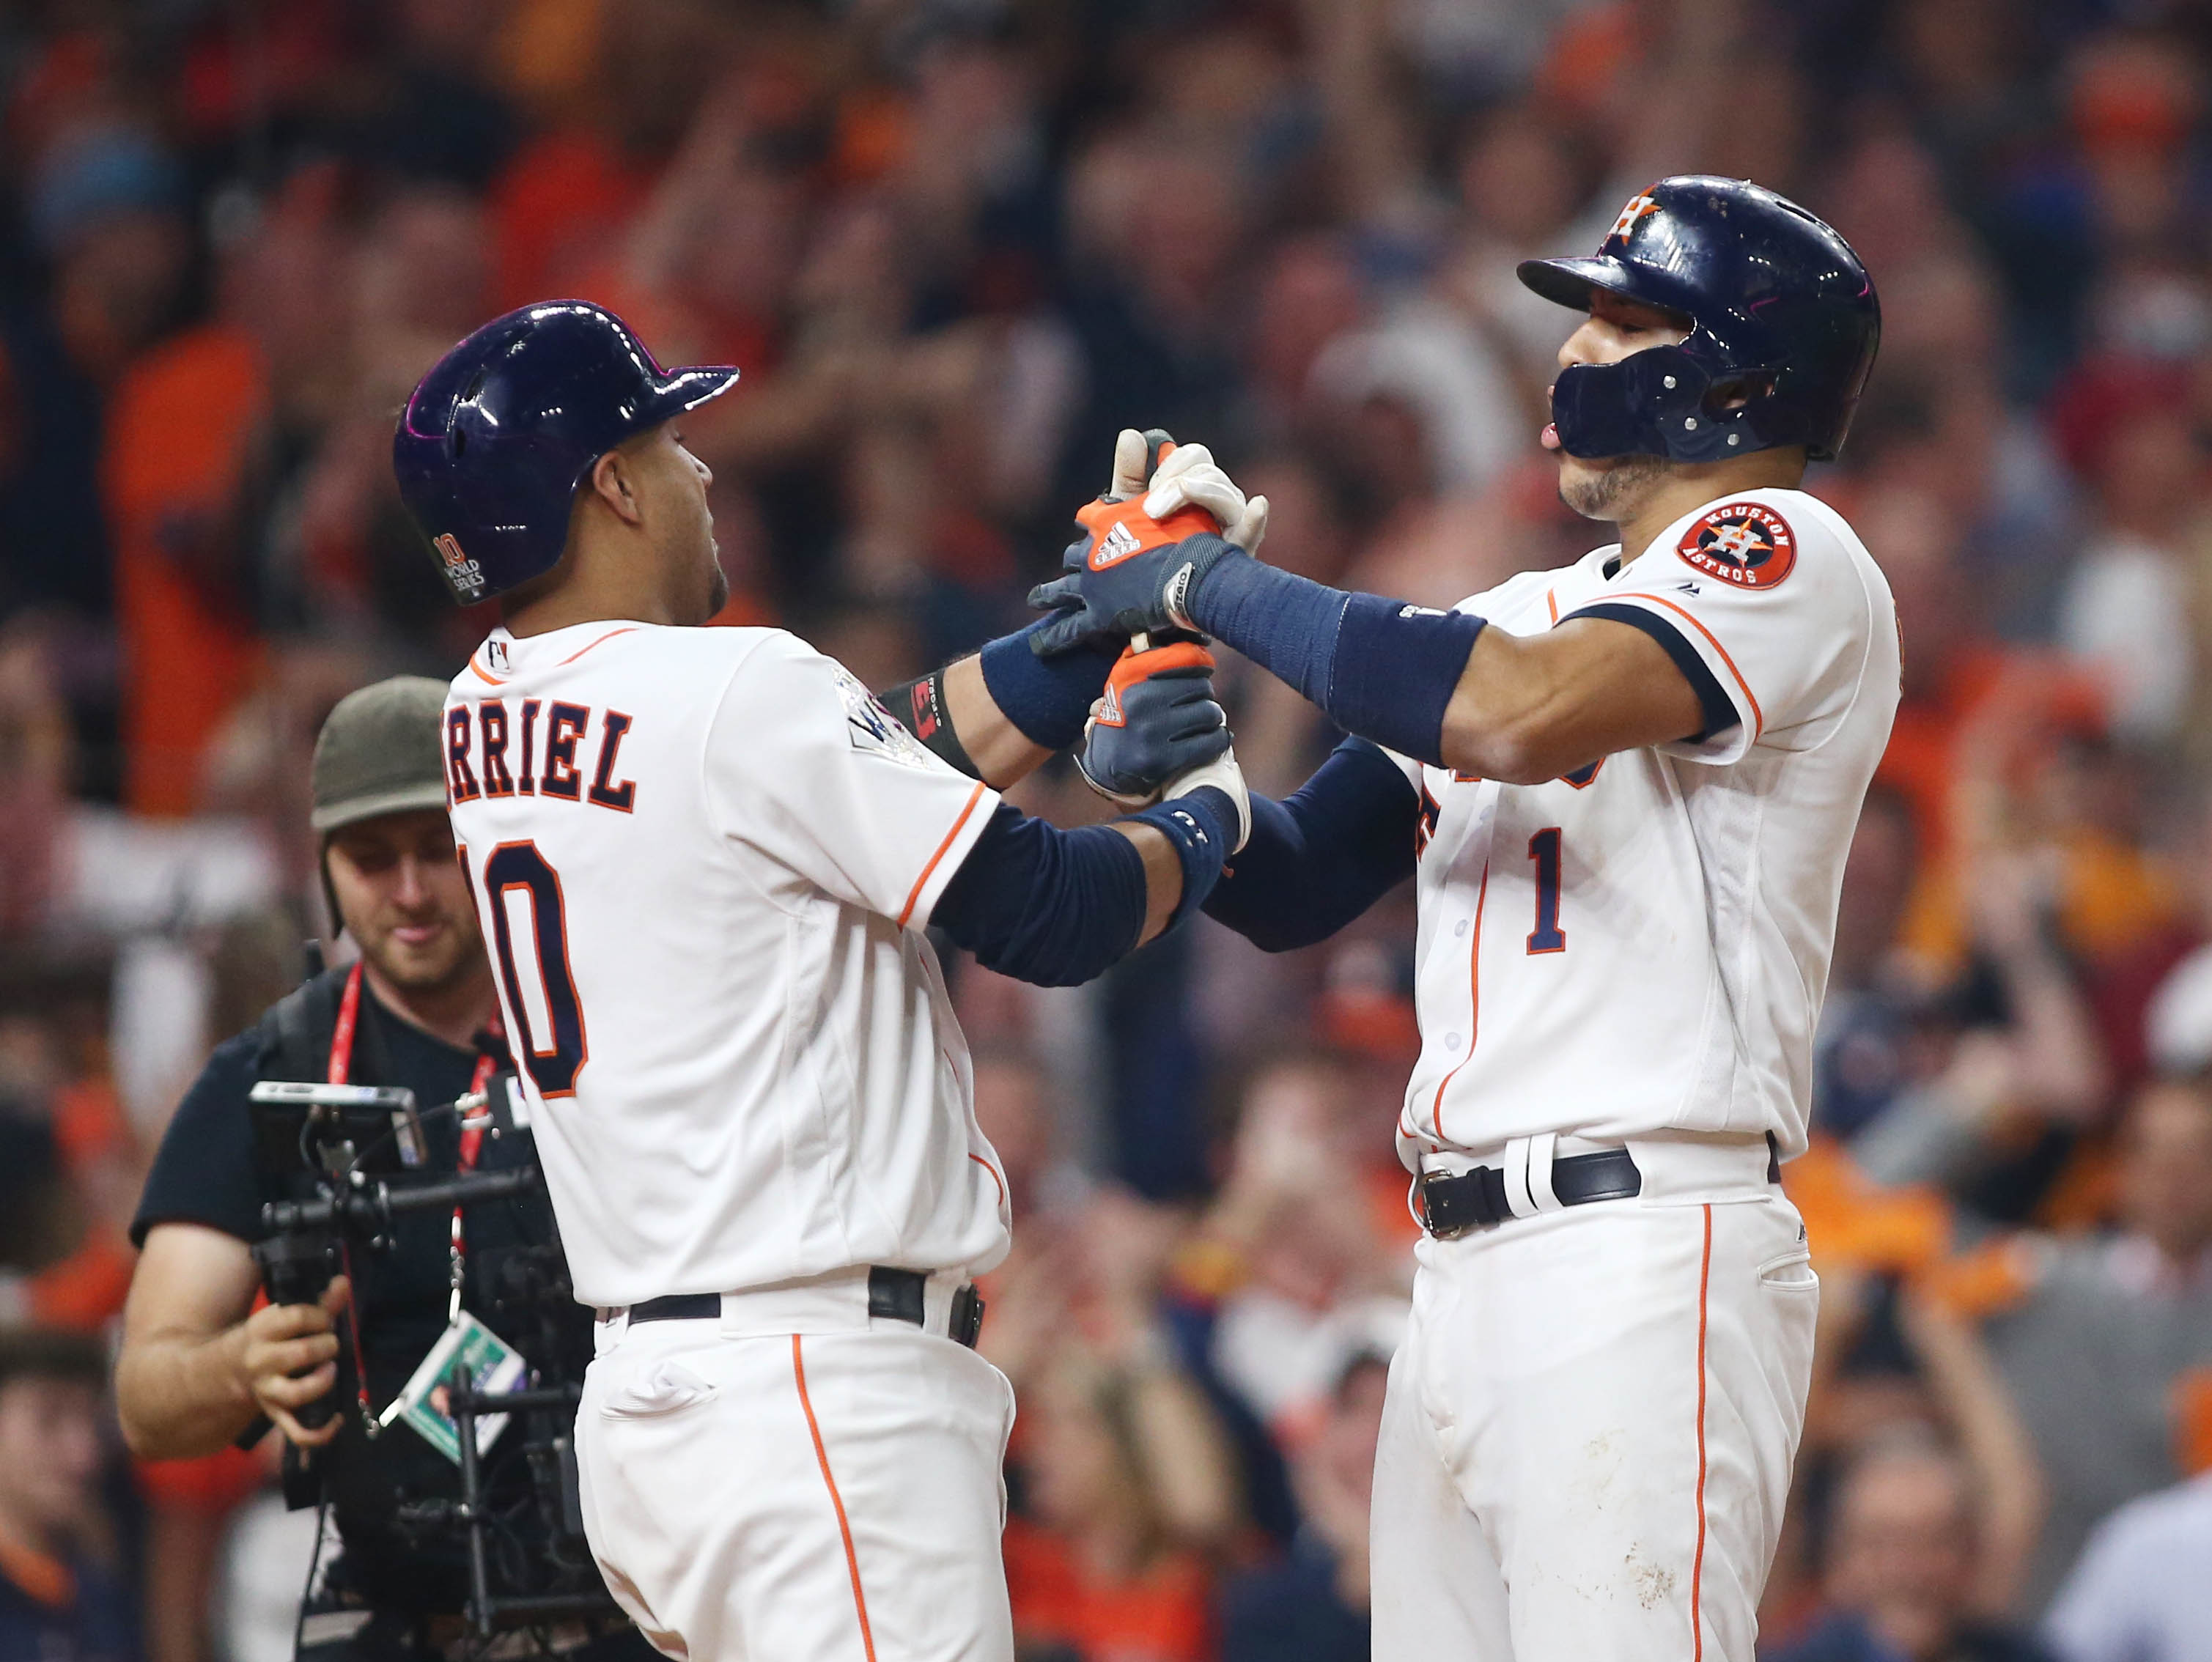 Photos: Astros look to take series lead vs. Dodgers in World Series Game 5